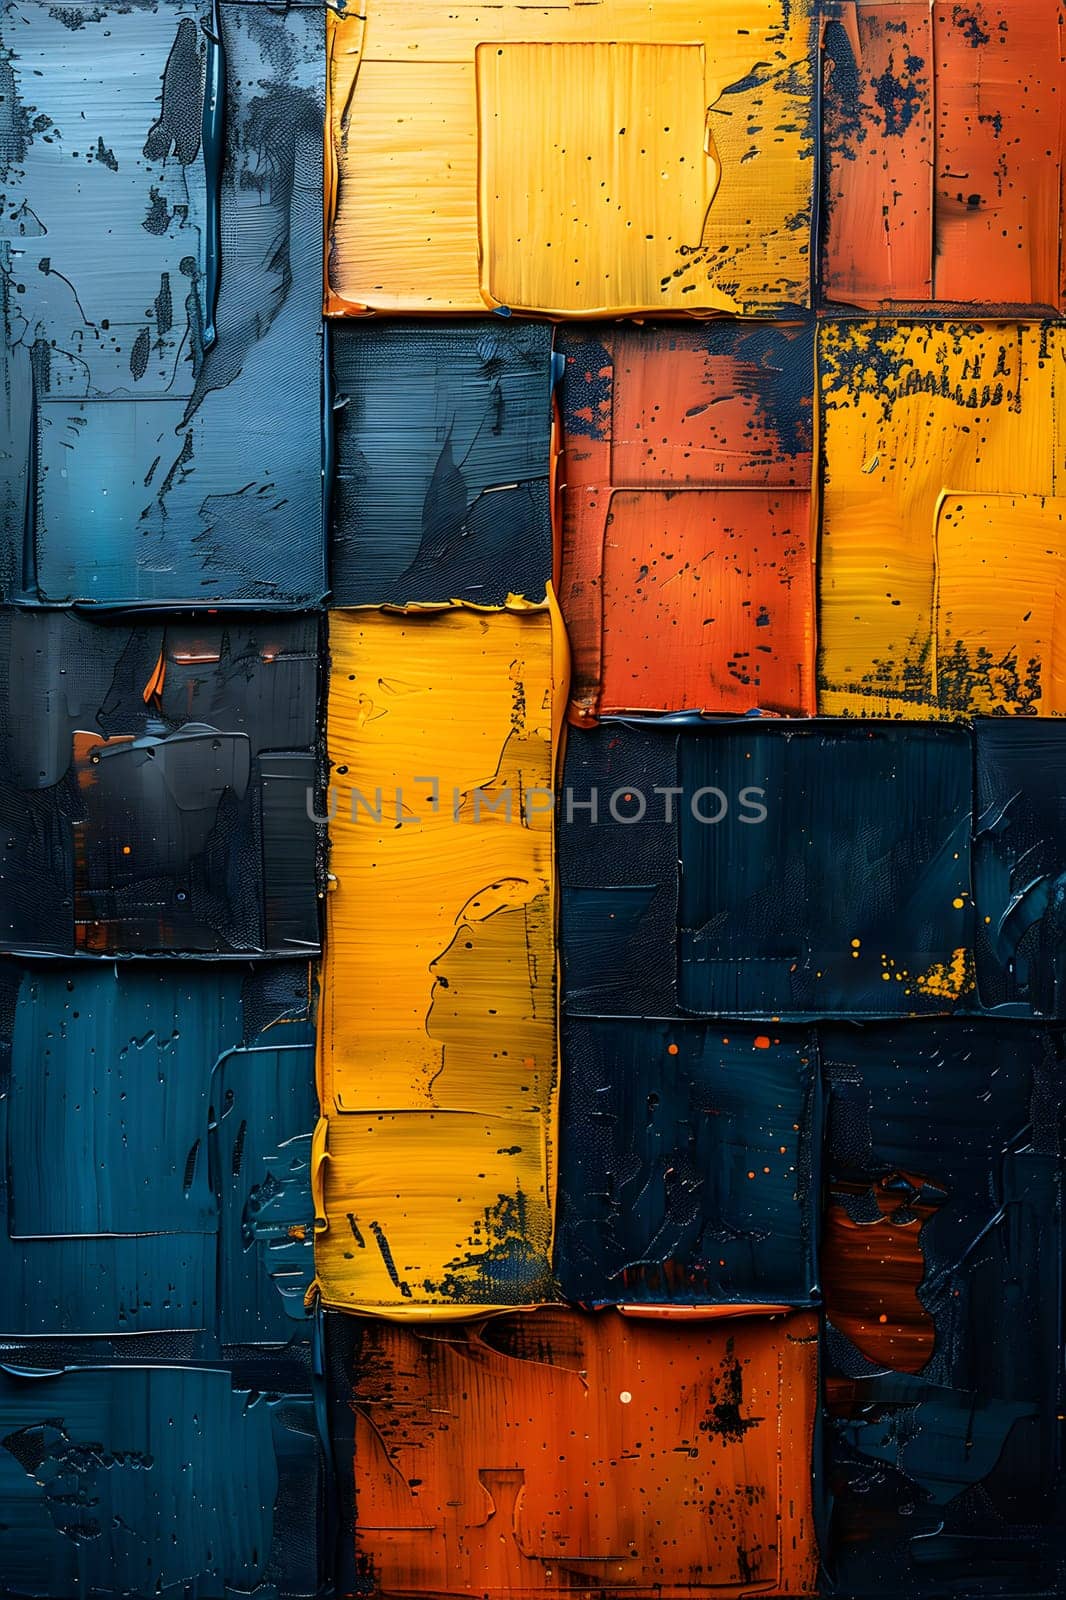 Brown, orange, amber, yellow, and electric blue boxes stacked as an art fixture by Nadtochiy